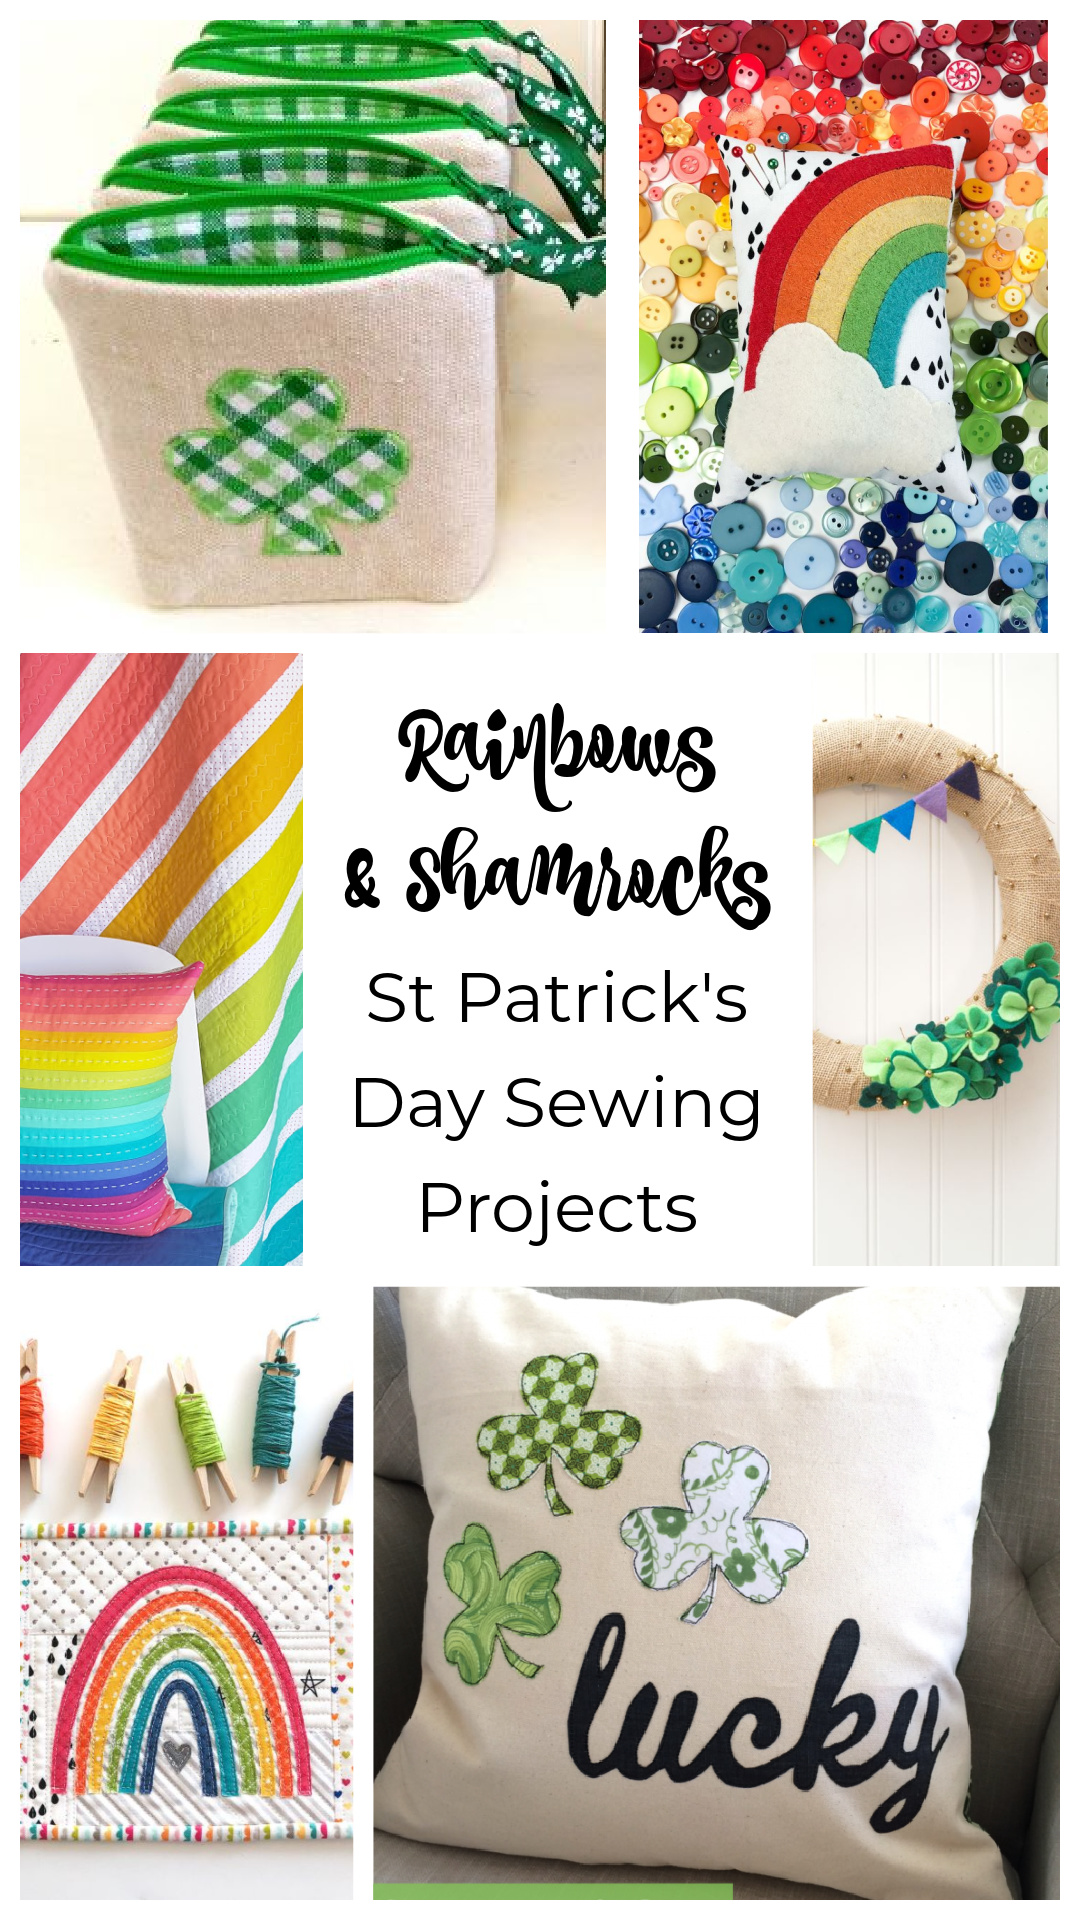 Shamrocks & Rainbows - St. Patrick's Day Sewing Projects 